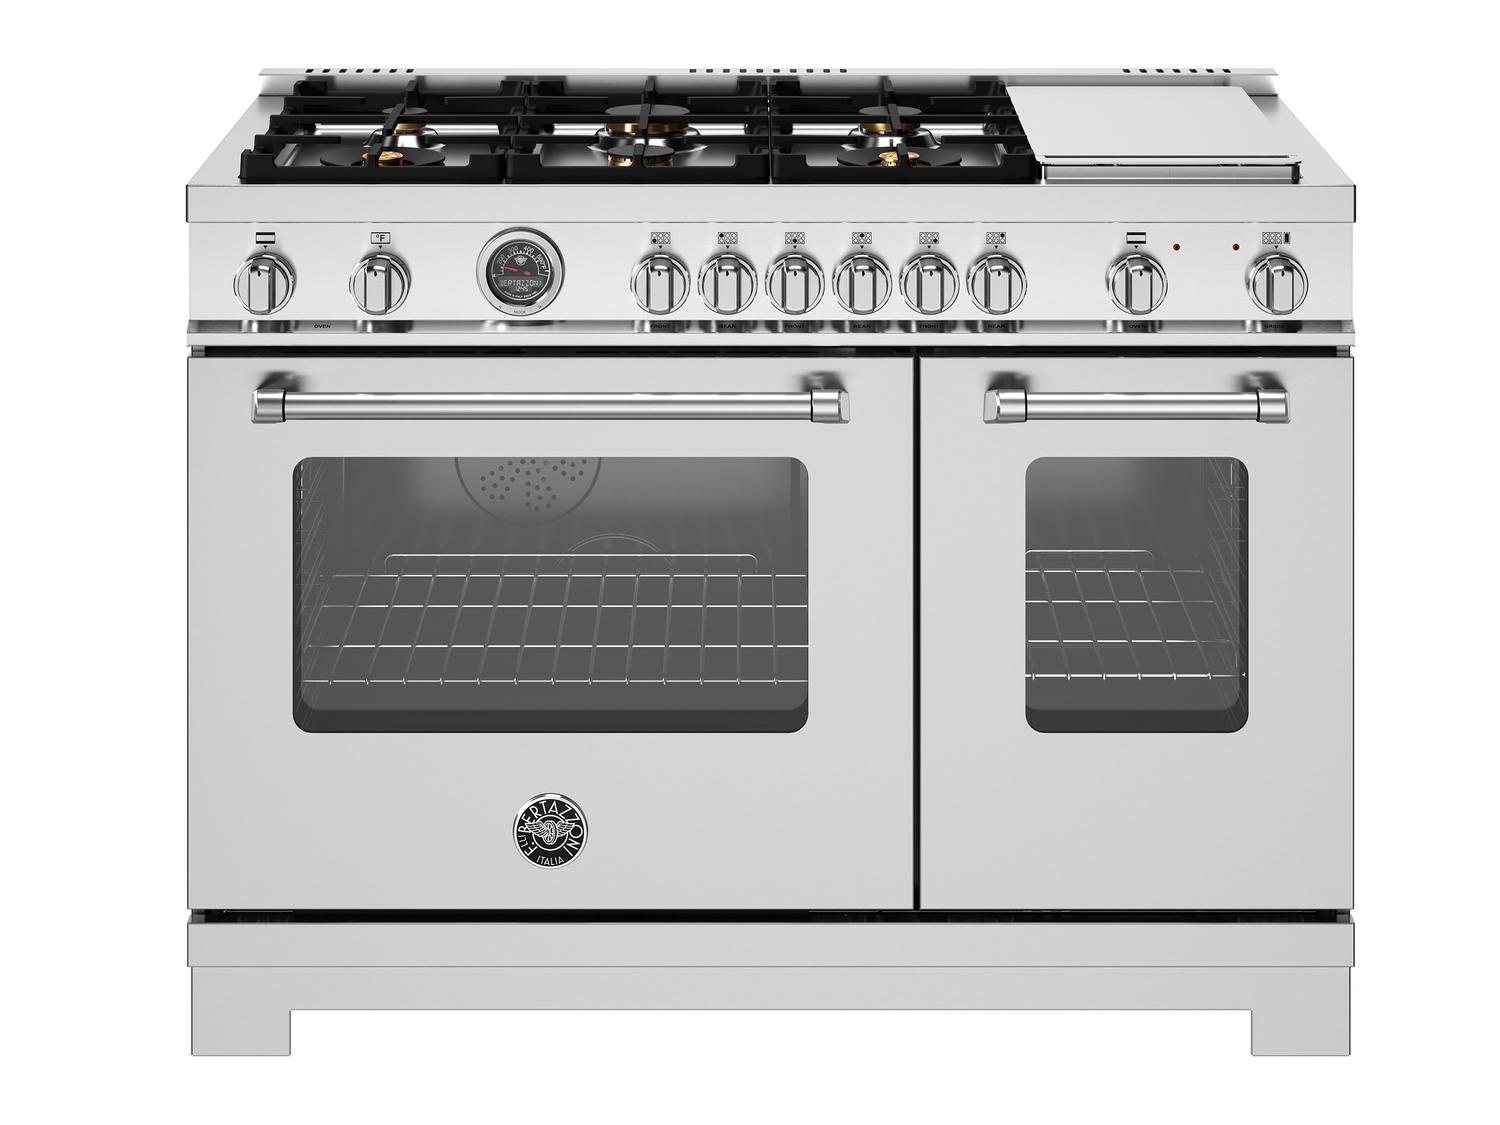 Bertazzoni MAS486BTFEPXT 48 Inch Dual Fuel Range, 6 Brass Burners And Griddle, Electric Self-Clean Oven Stainless Steel